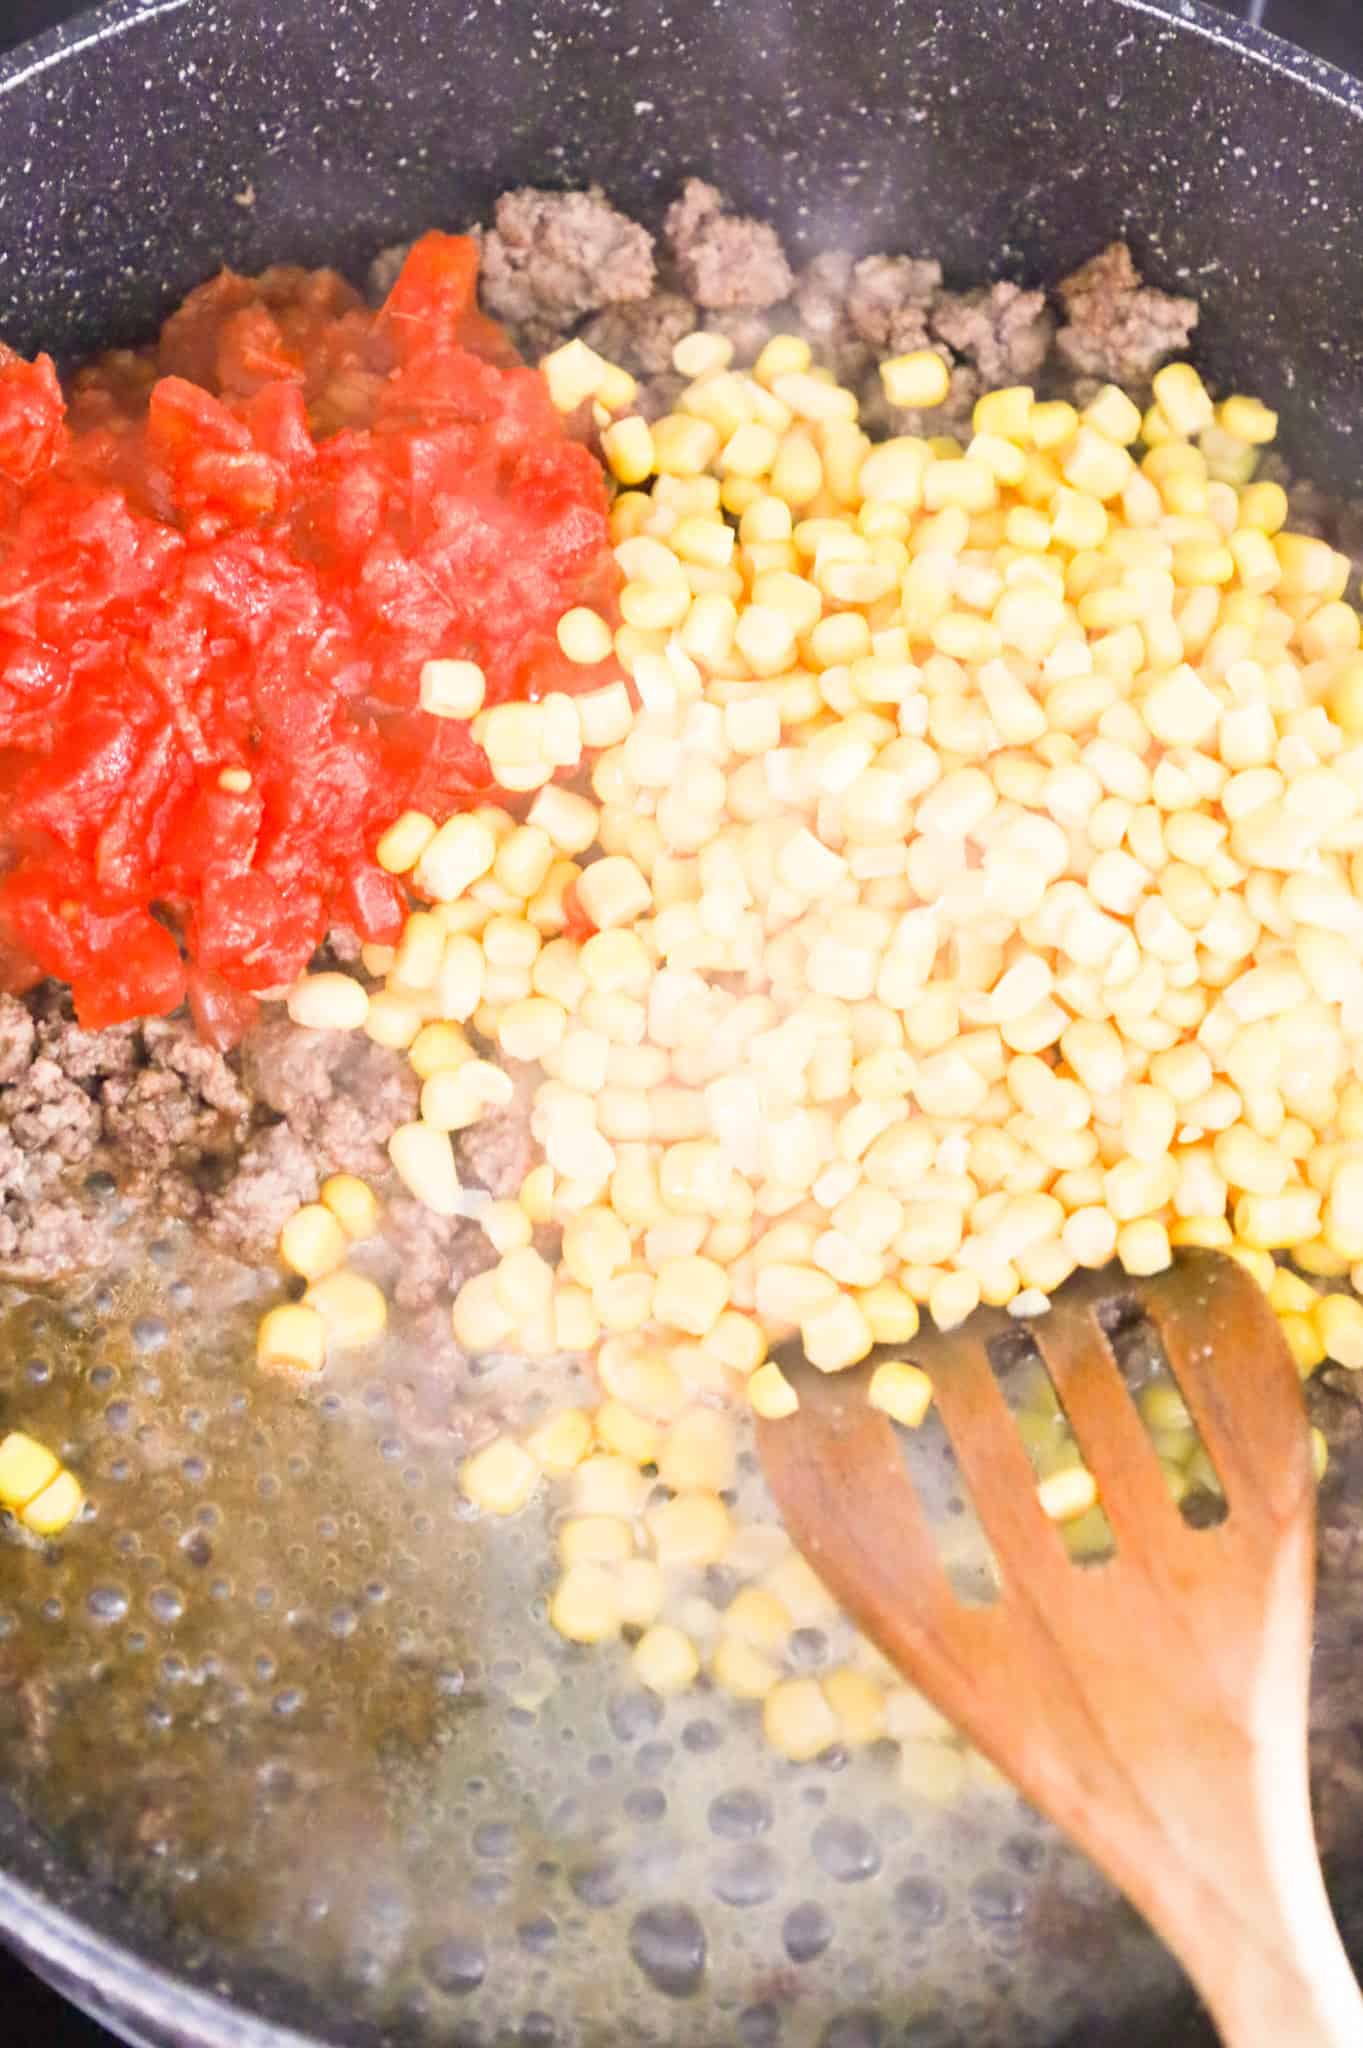 Rotel and canned corn kernels added to skillet with cooked ground beef